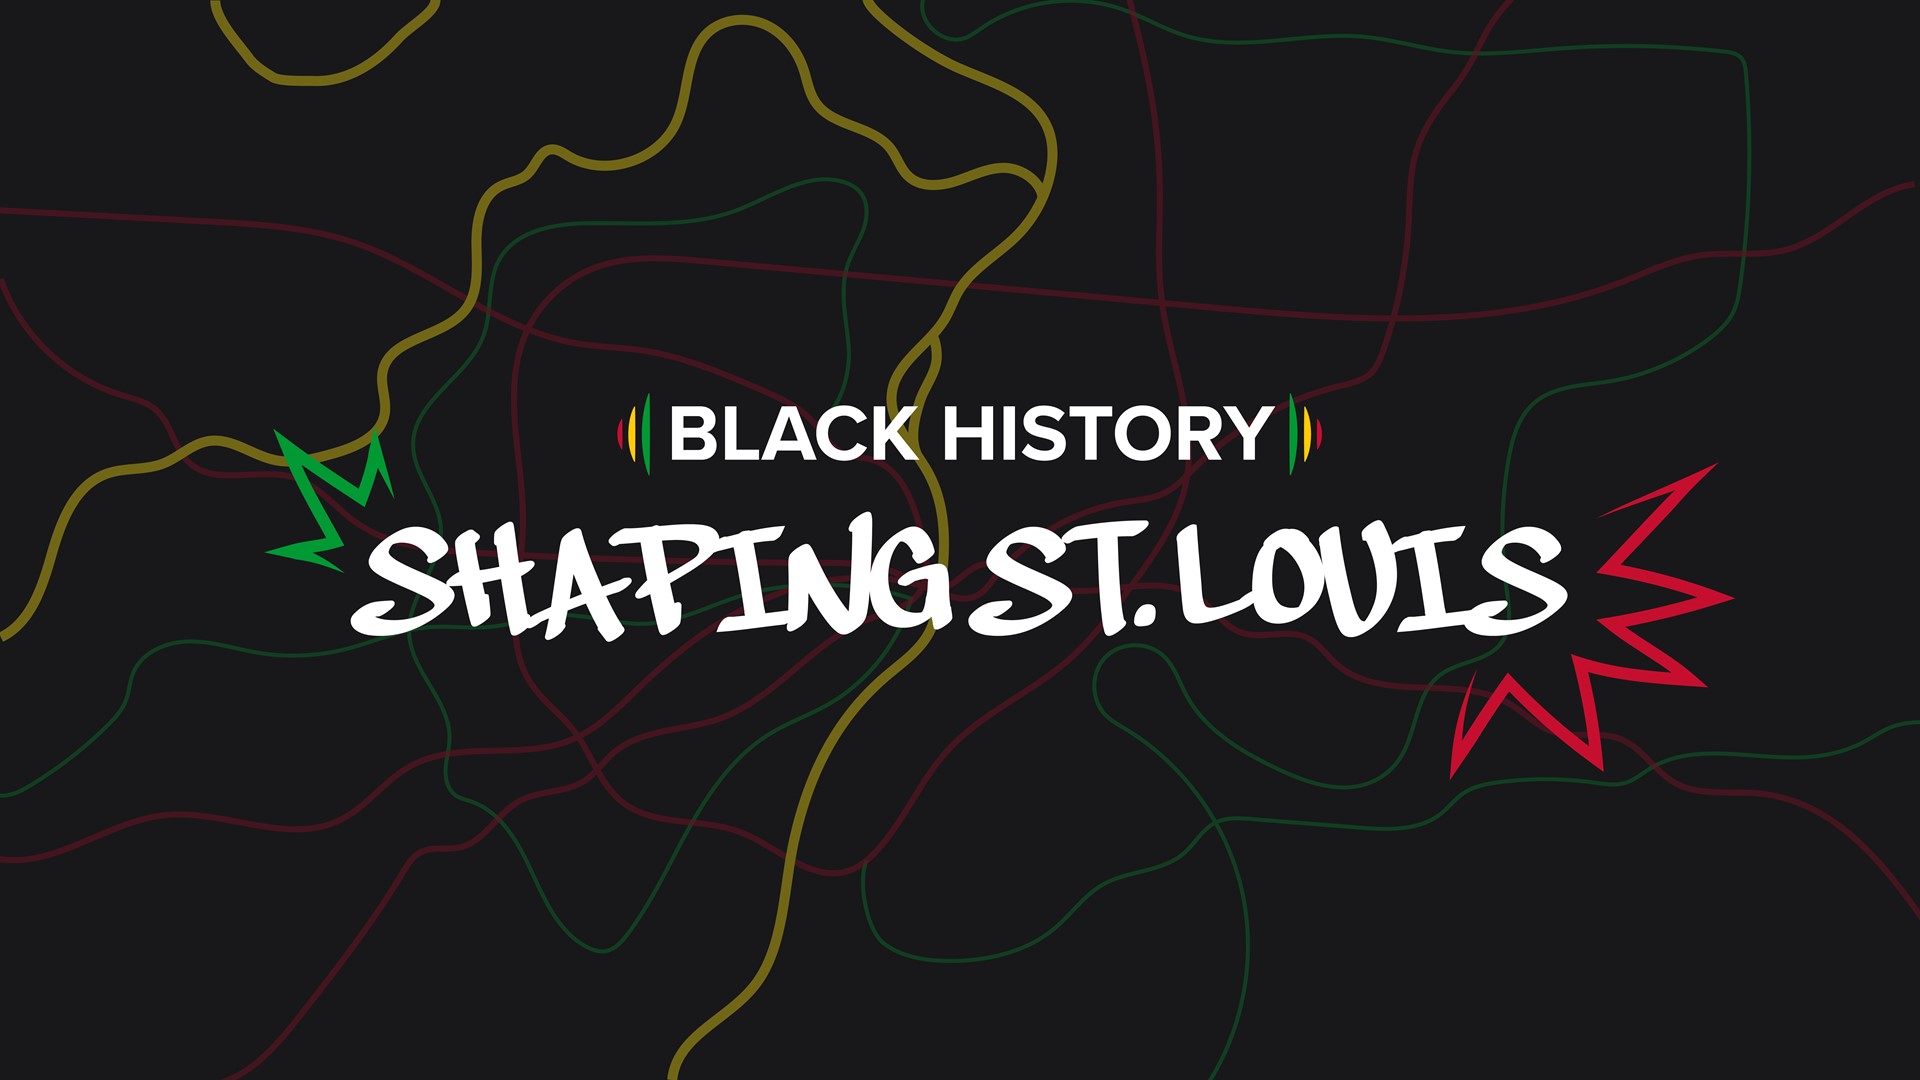 In celebration of Black History Month, 5 On Your Side’s Kelly Jackson and Brent Solomon will lead a conversation with Black St. Louisans.